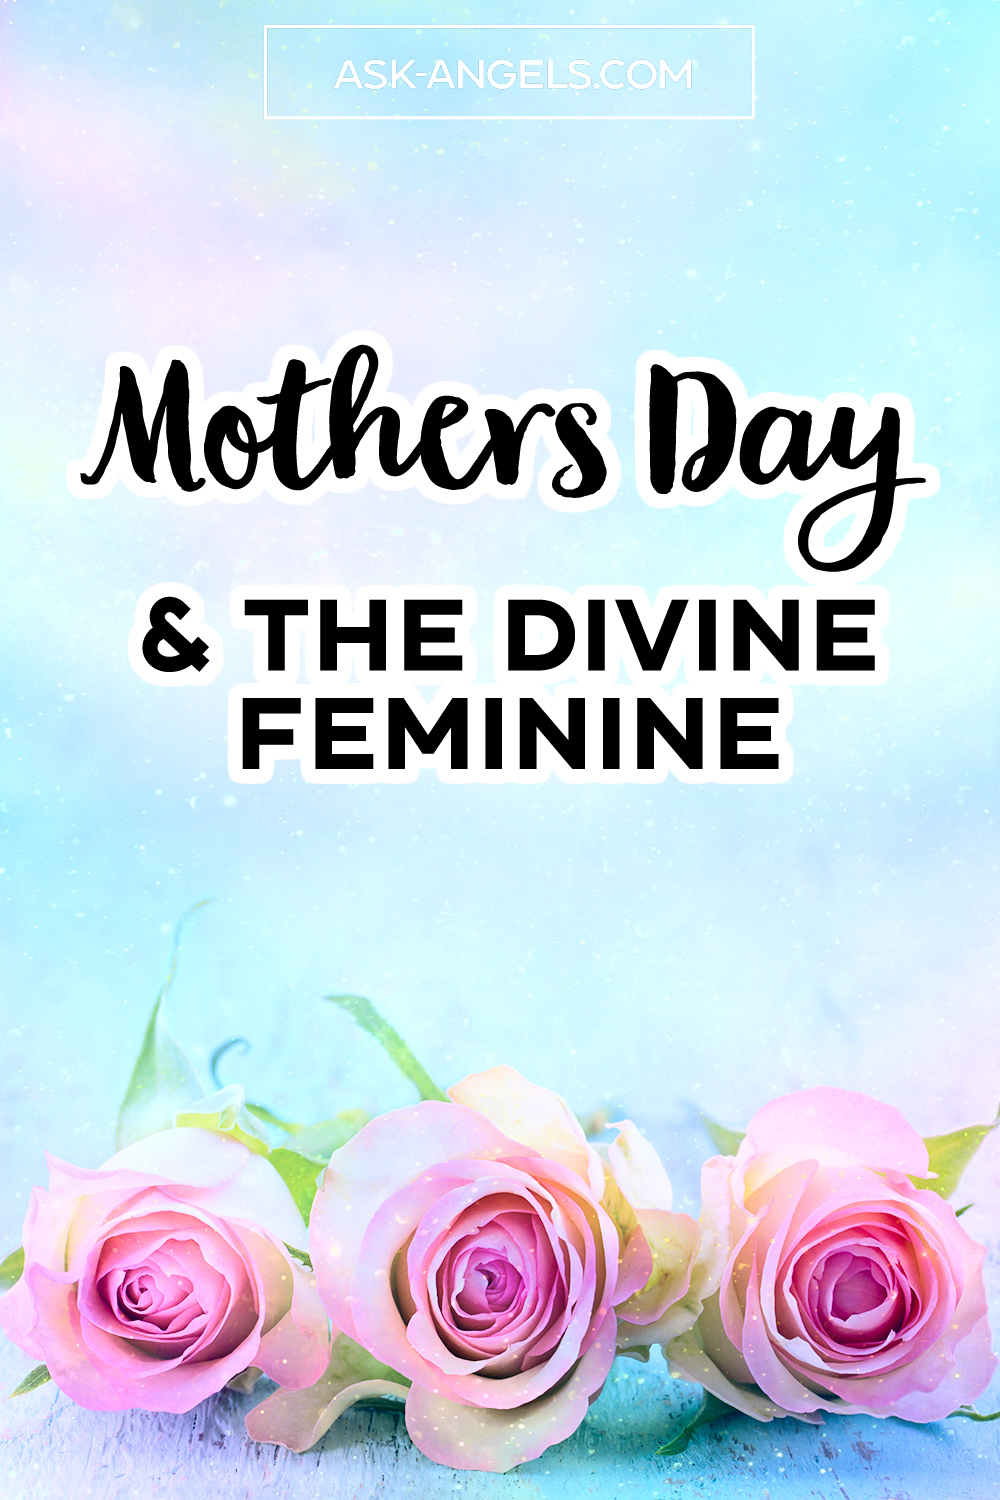 Mothers Day & The Divine Feminine